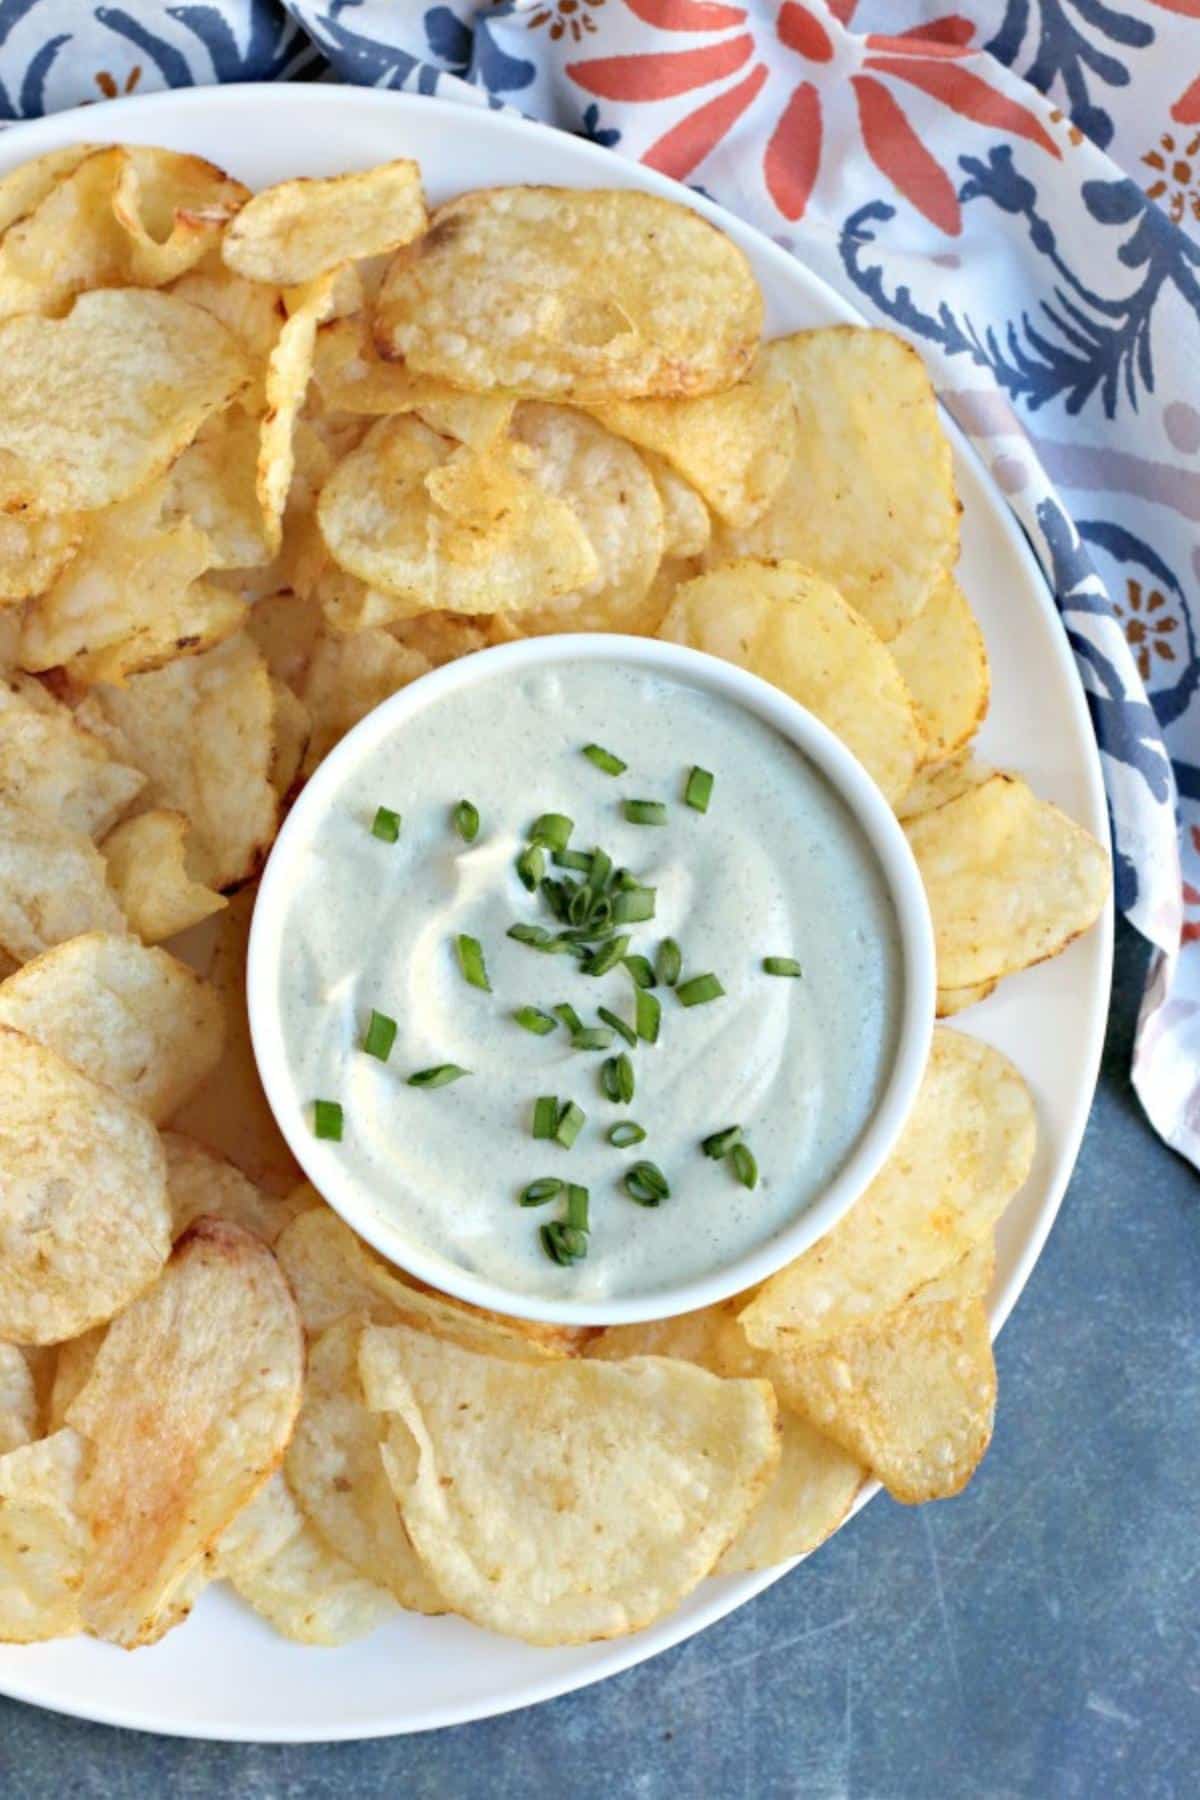 Potato chips on a platter with a bowl of dip.